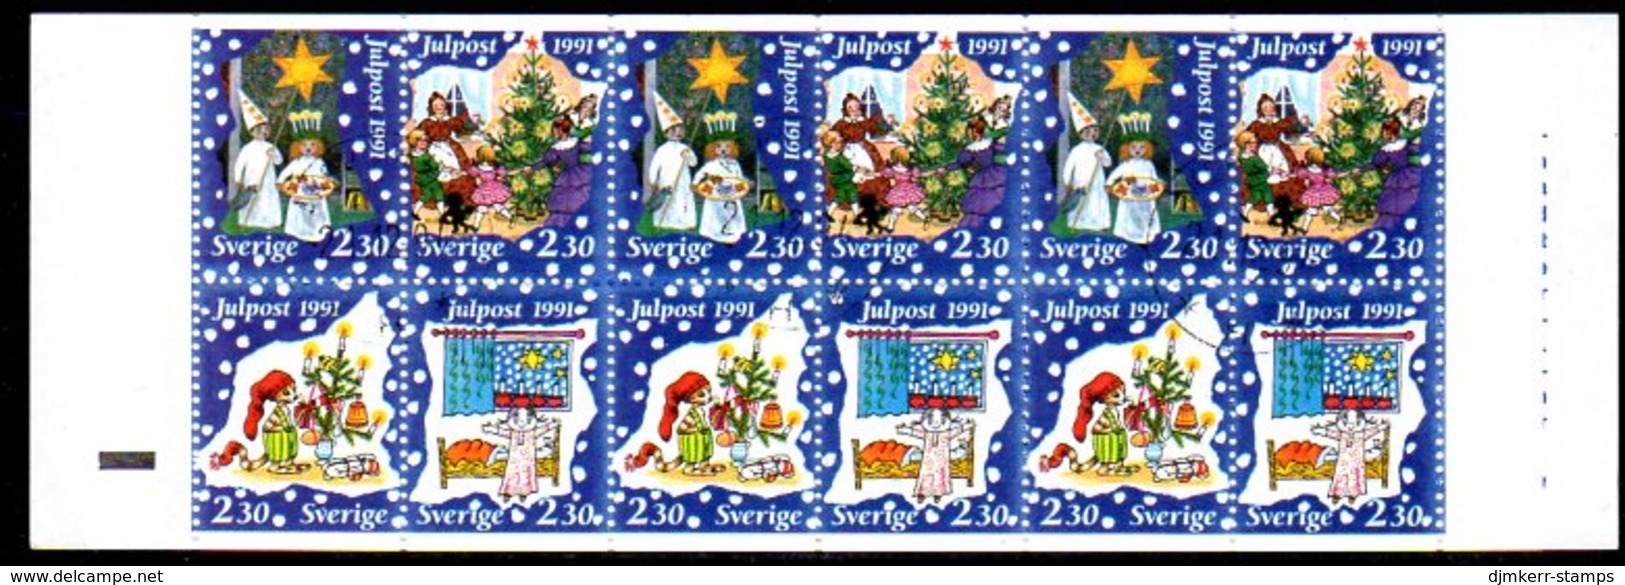 SWEDEN 1991 Christmas Booklet MNH / **,  Michel MH165 - 1981-..